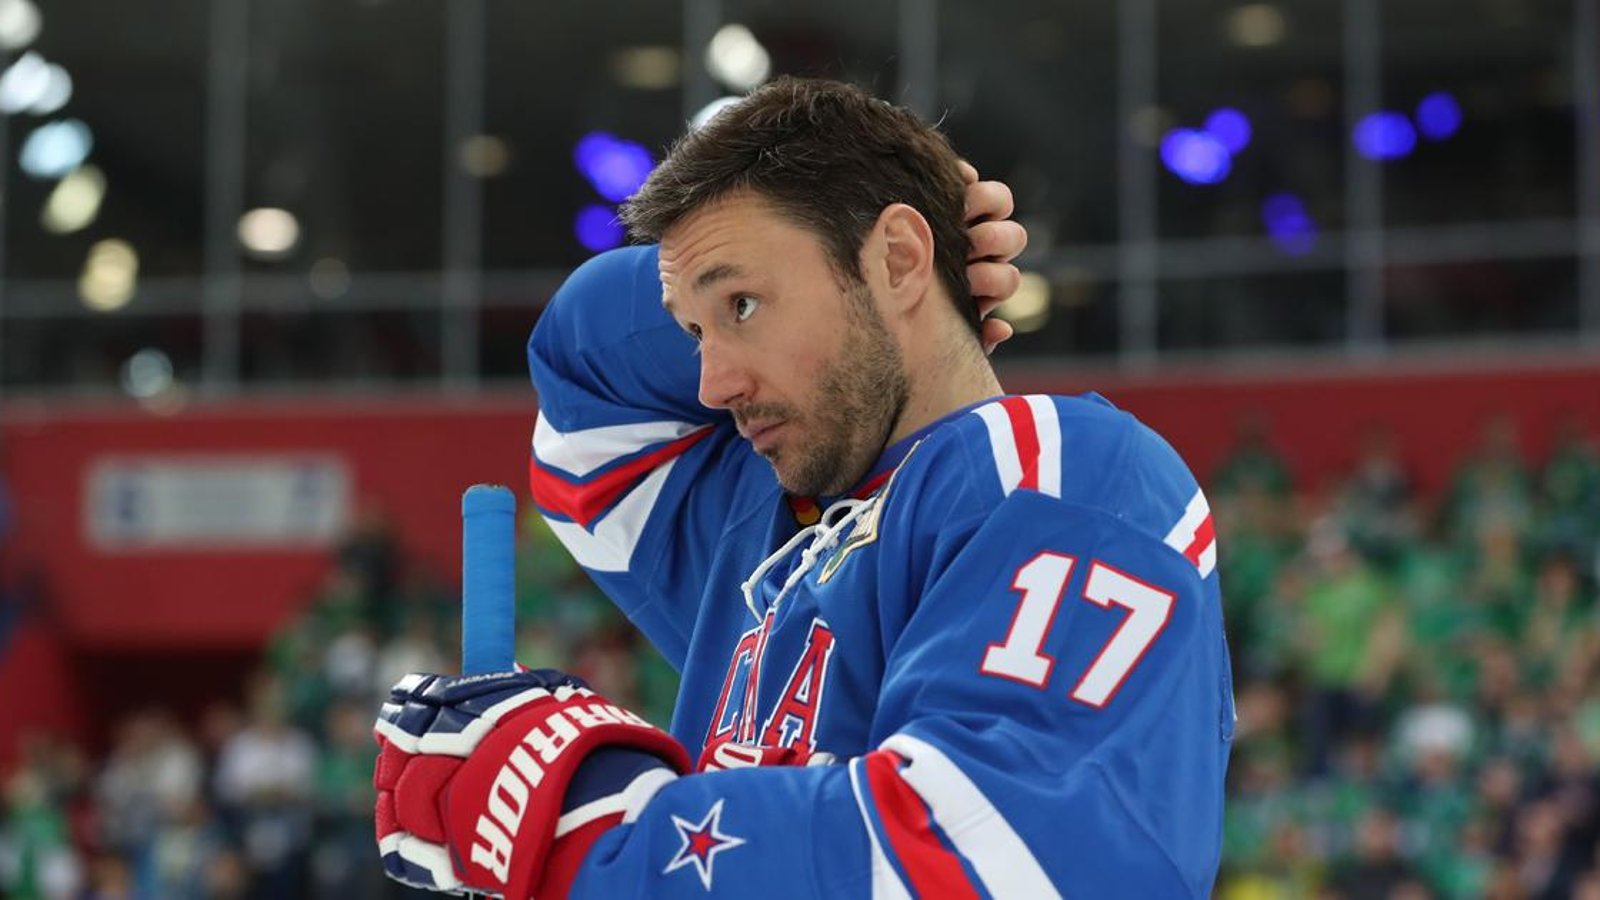 Frustrating facts uncovered about Ilya Kovalchuk's past months. 